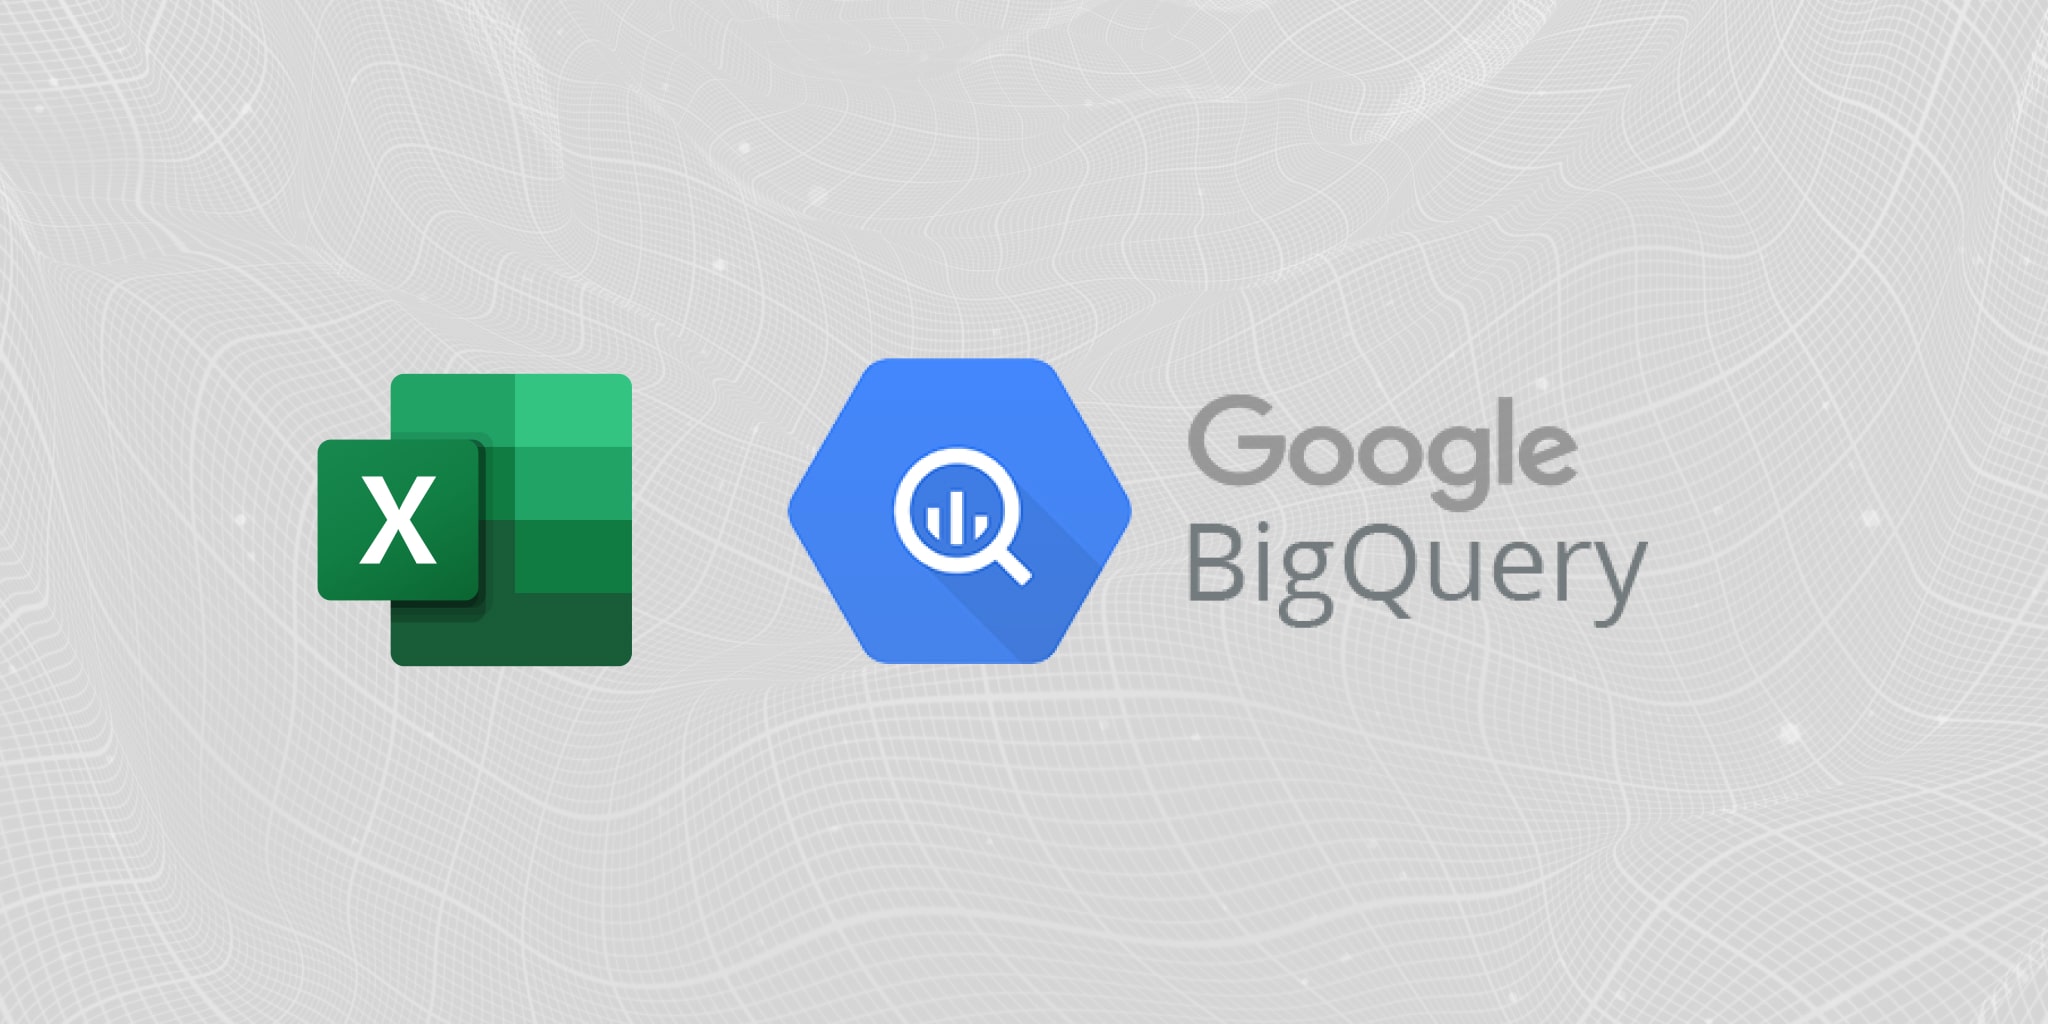 How To Connect Excel And Google Bigquery